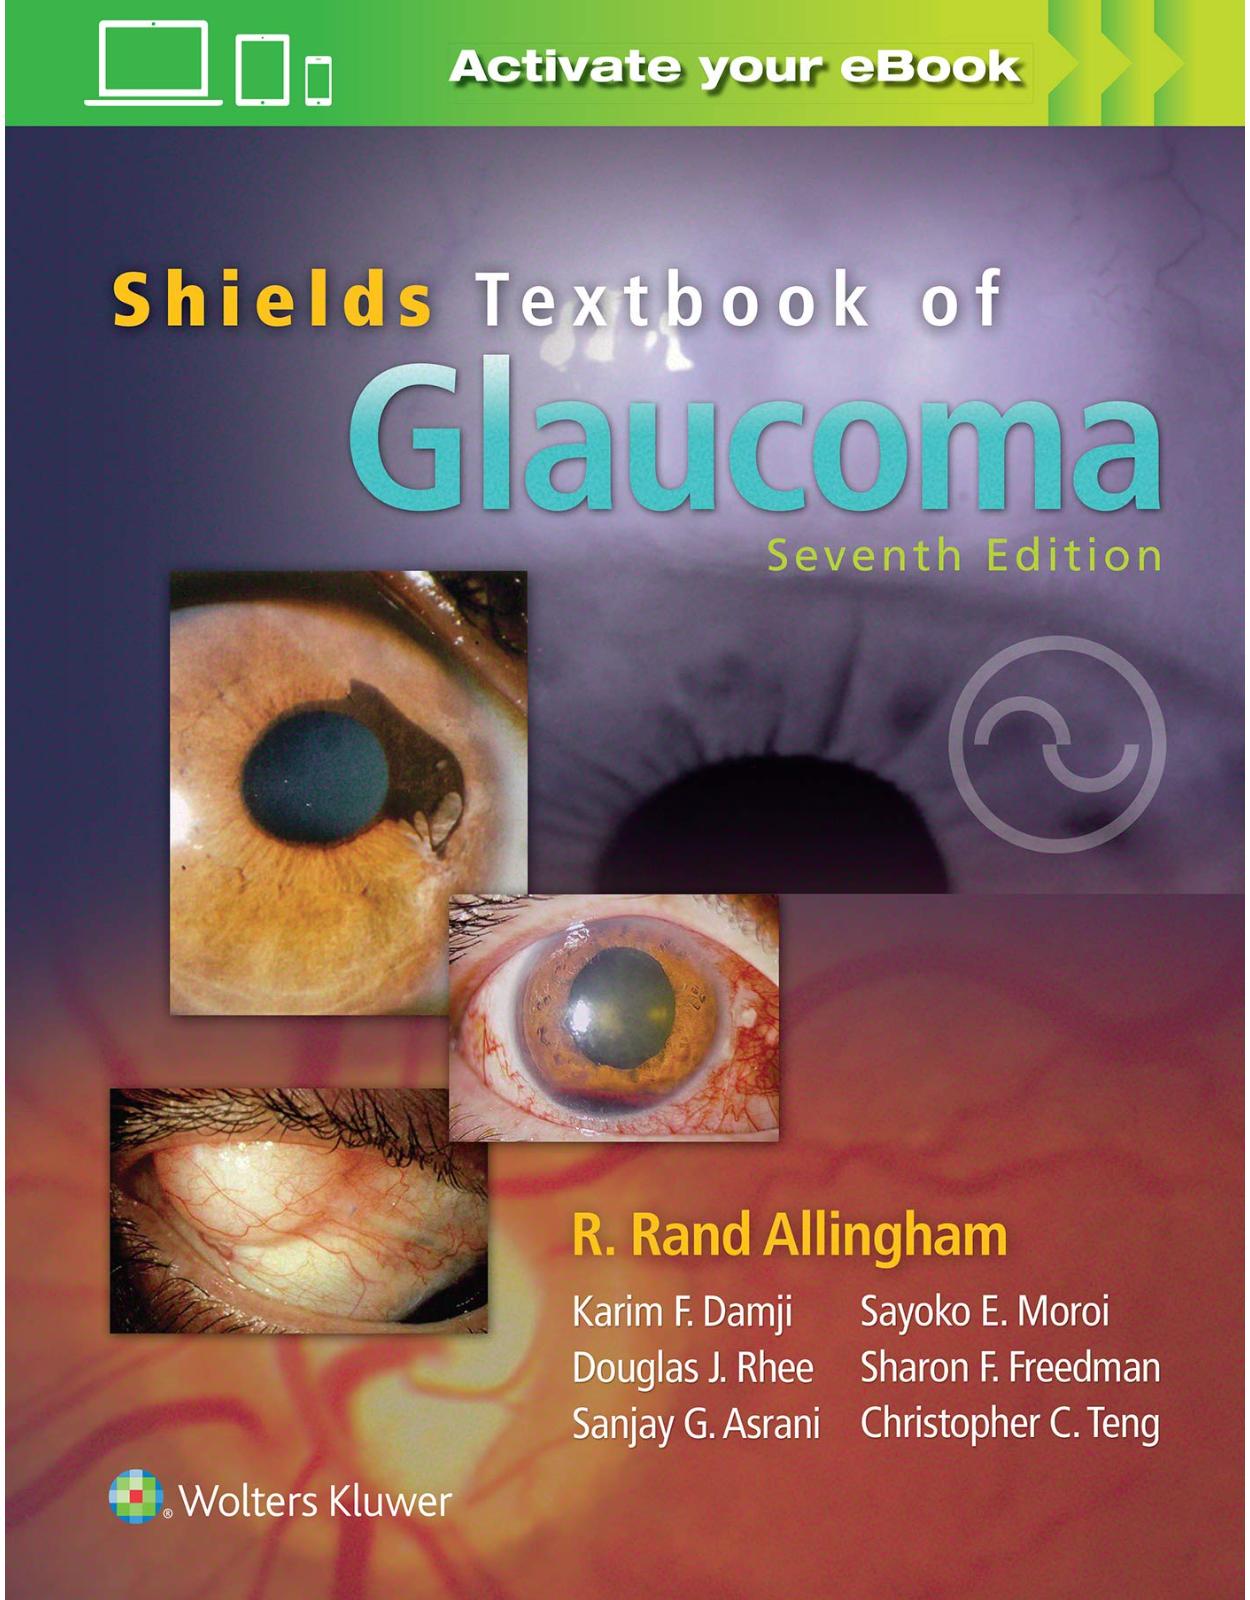 Shields’ Textbook of Glaucoma